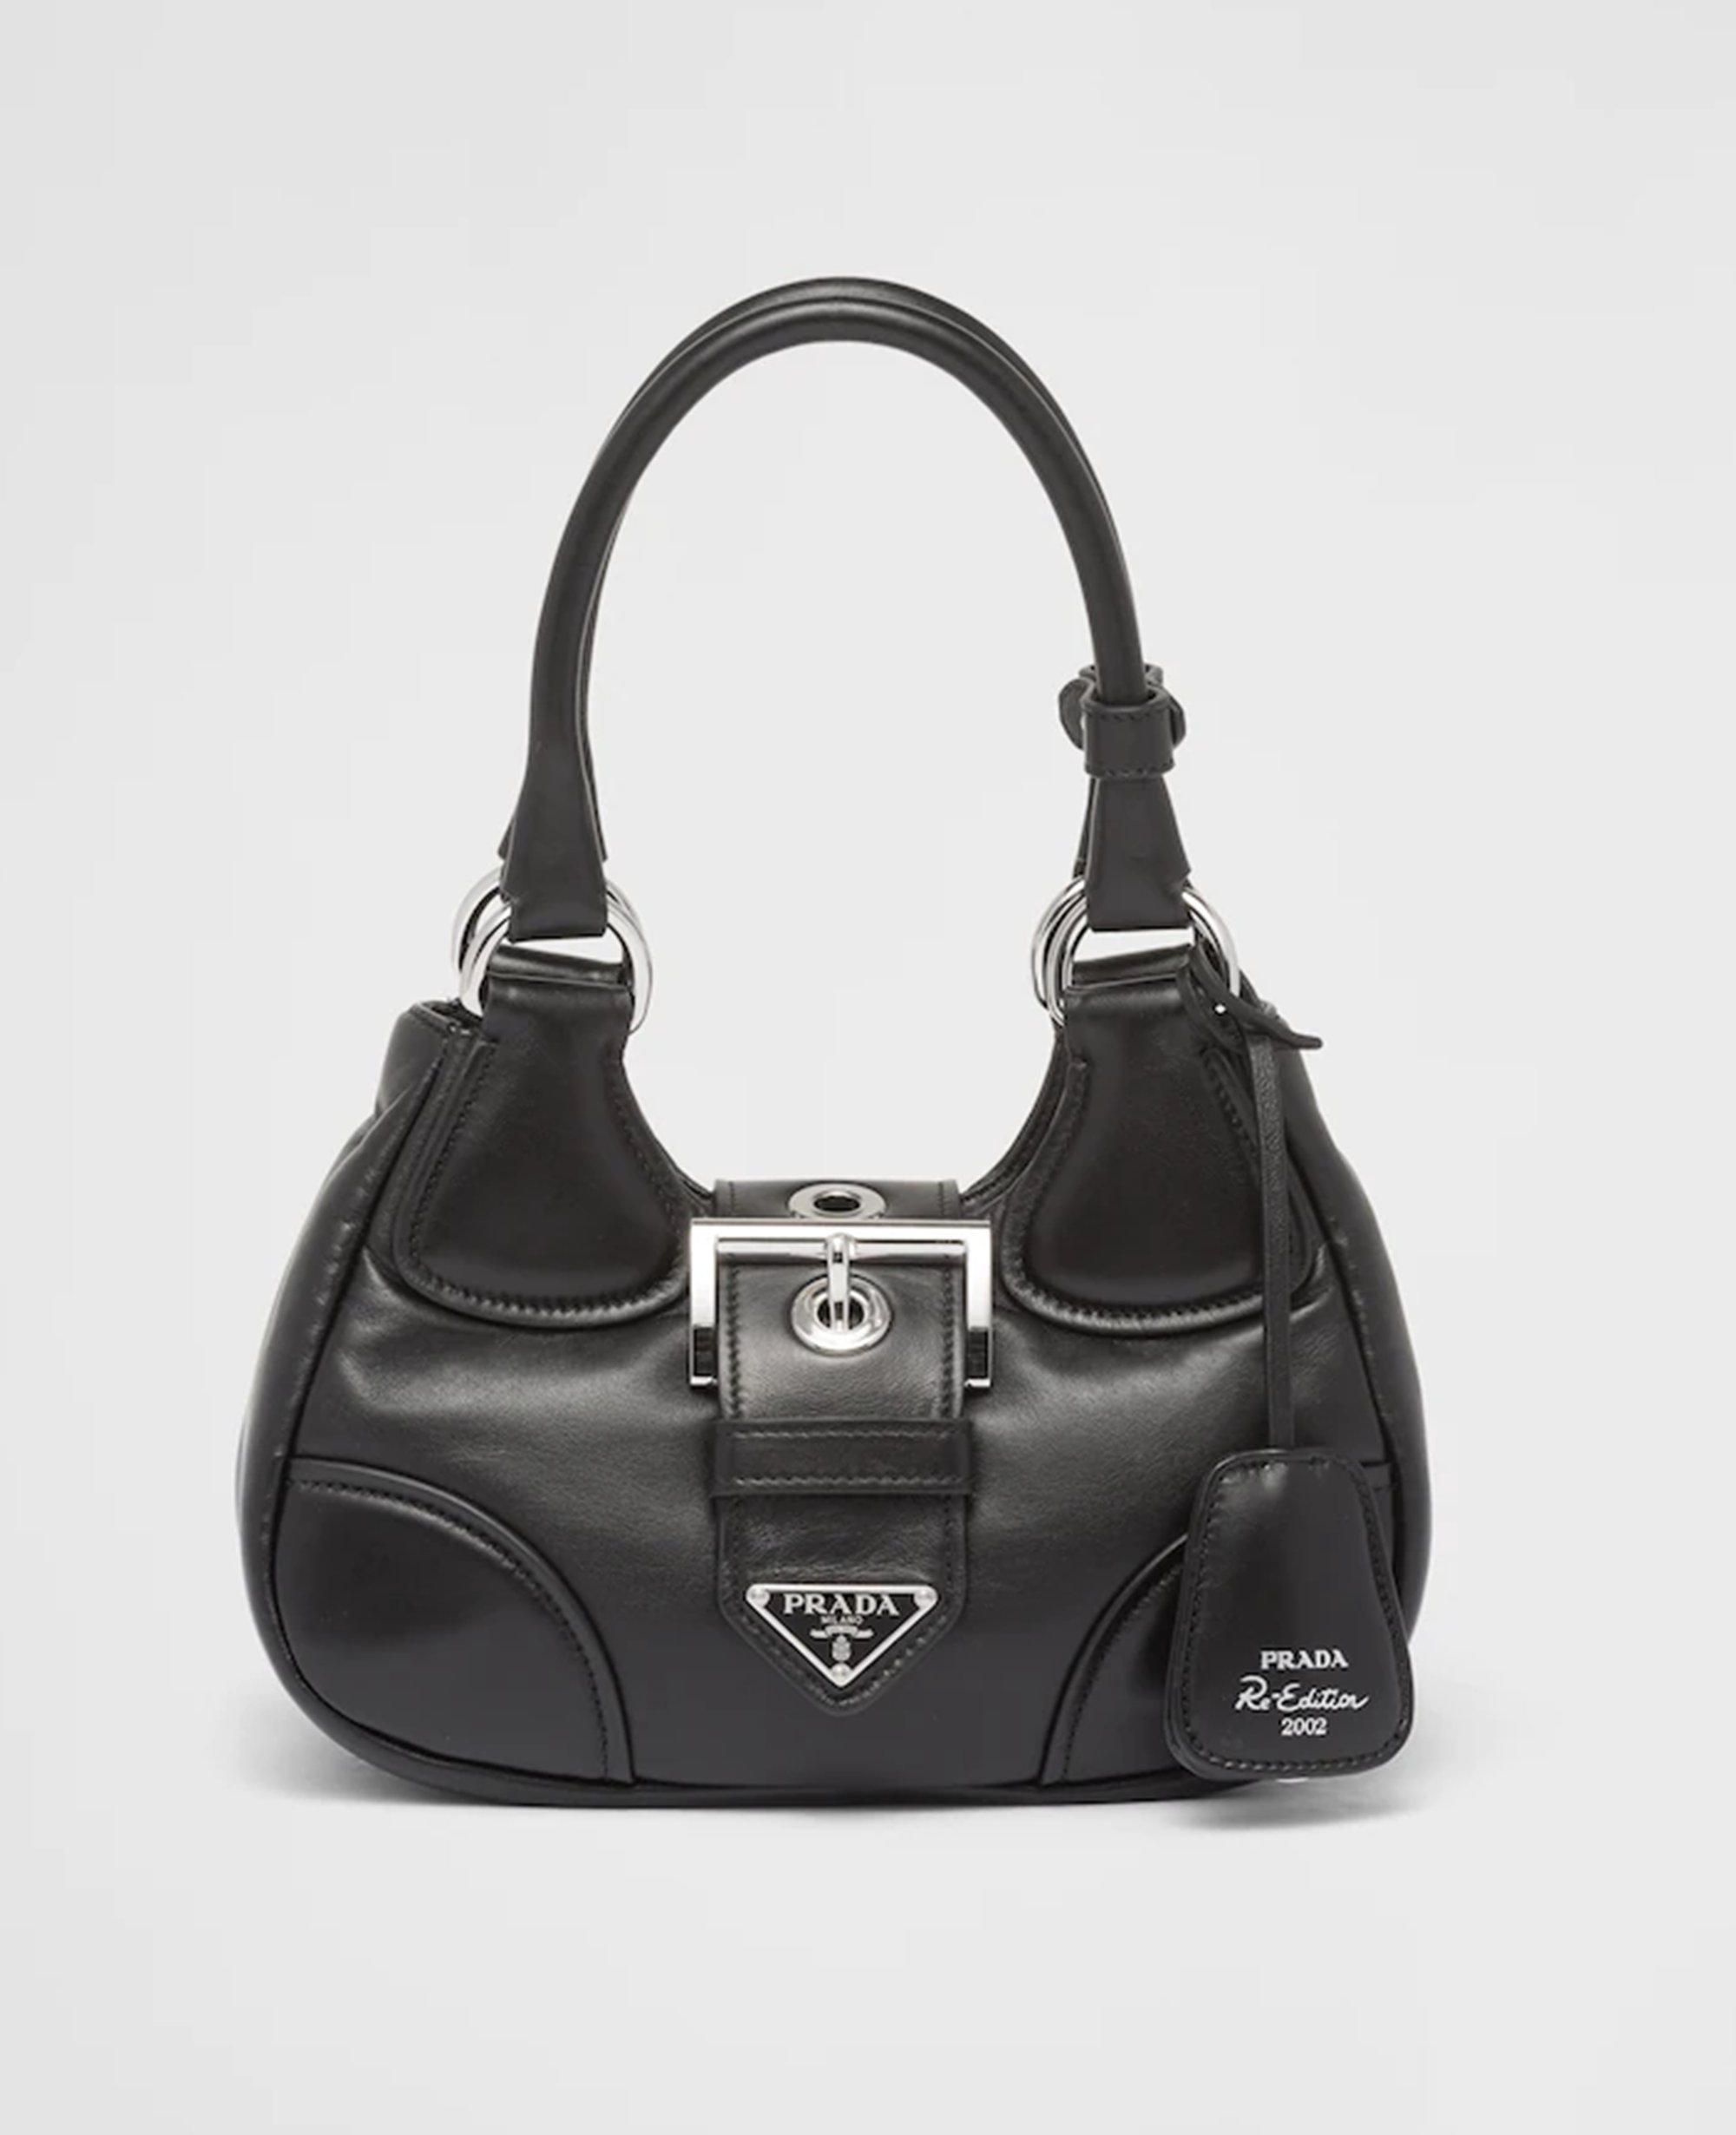 My latest  find is the prada cleo purse dupe! She's so chic 🤍